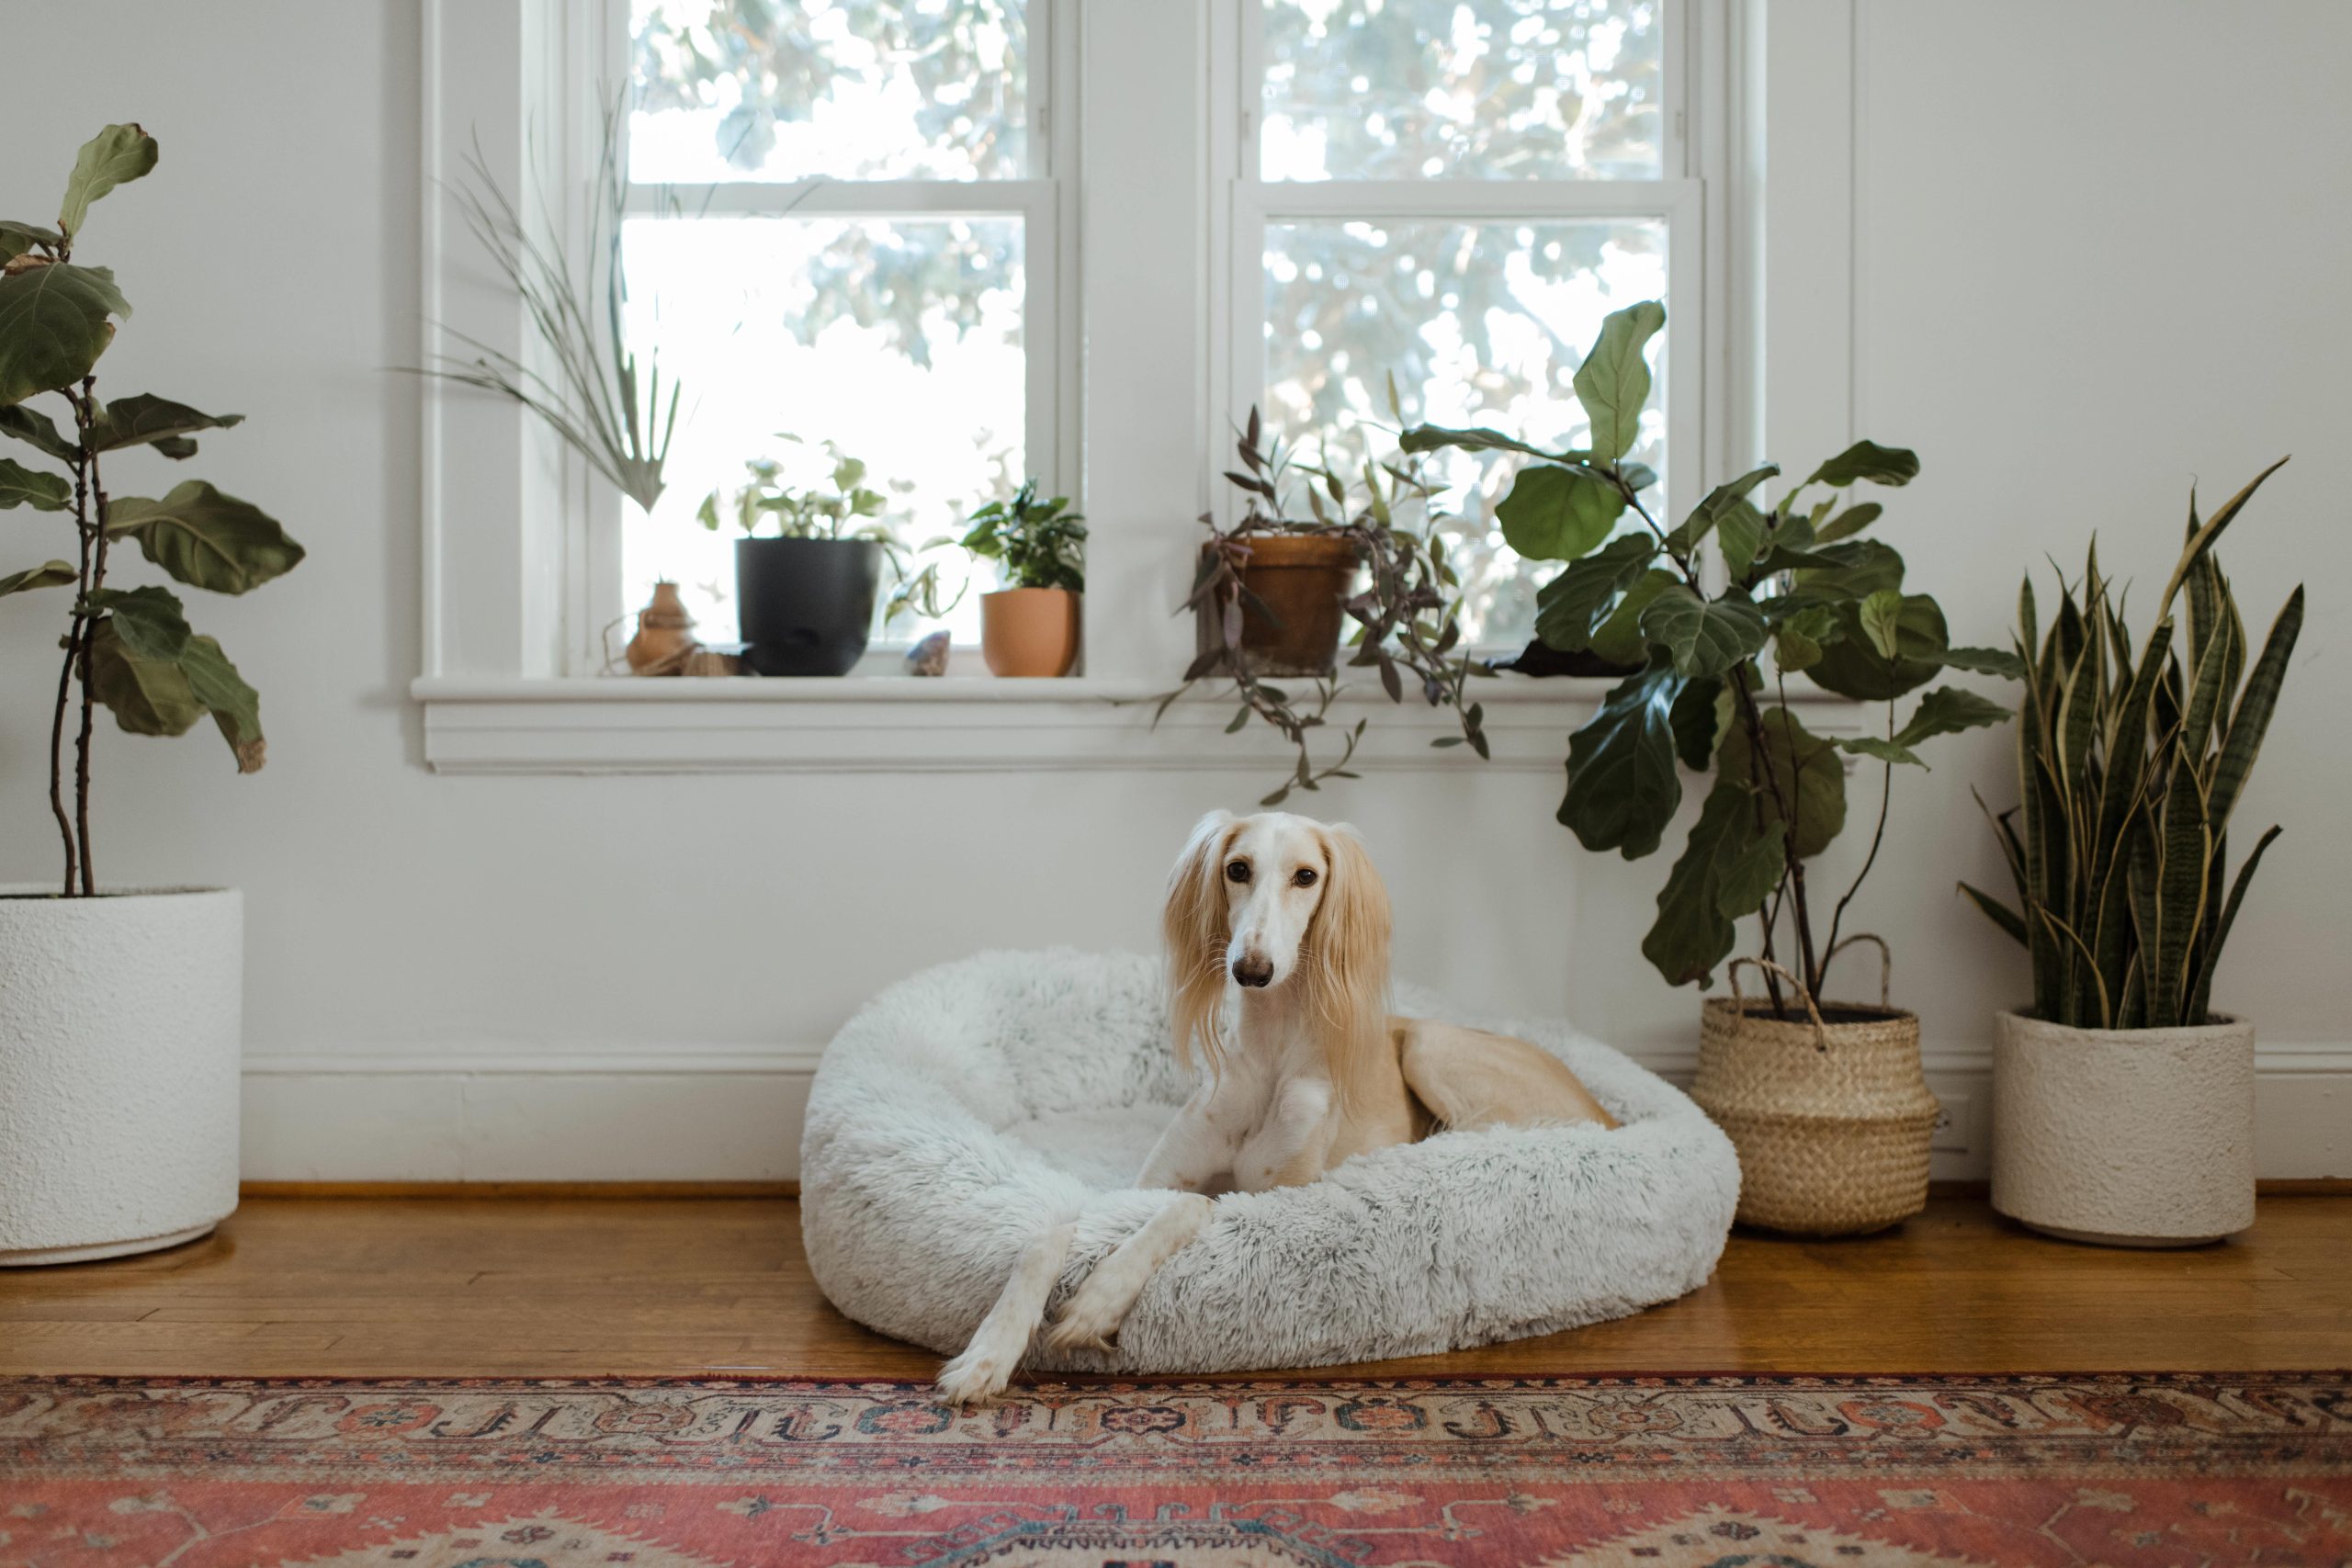 Dog-Friendly Plants and Gardens